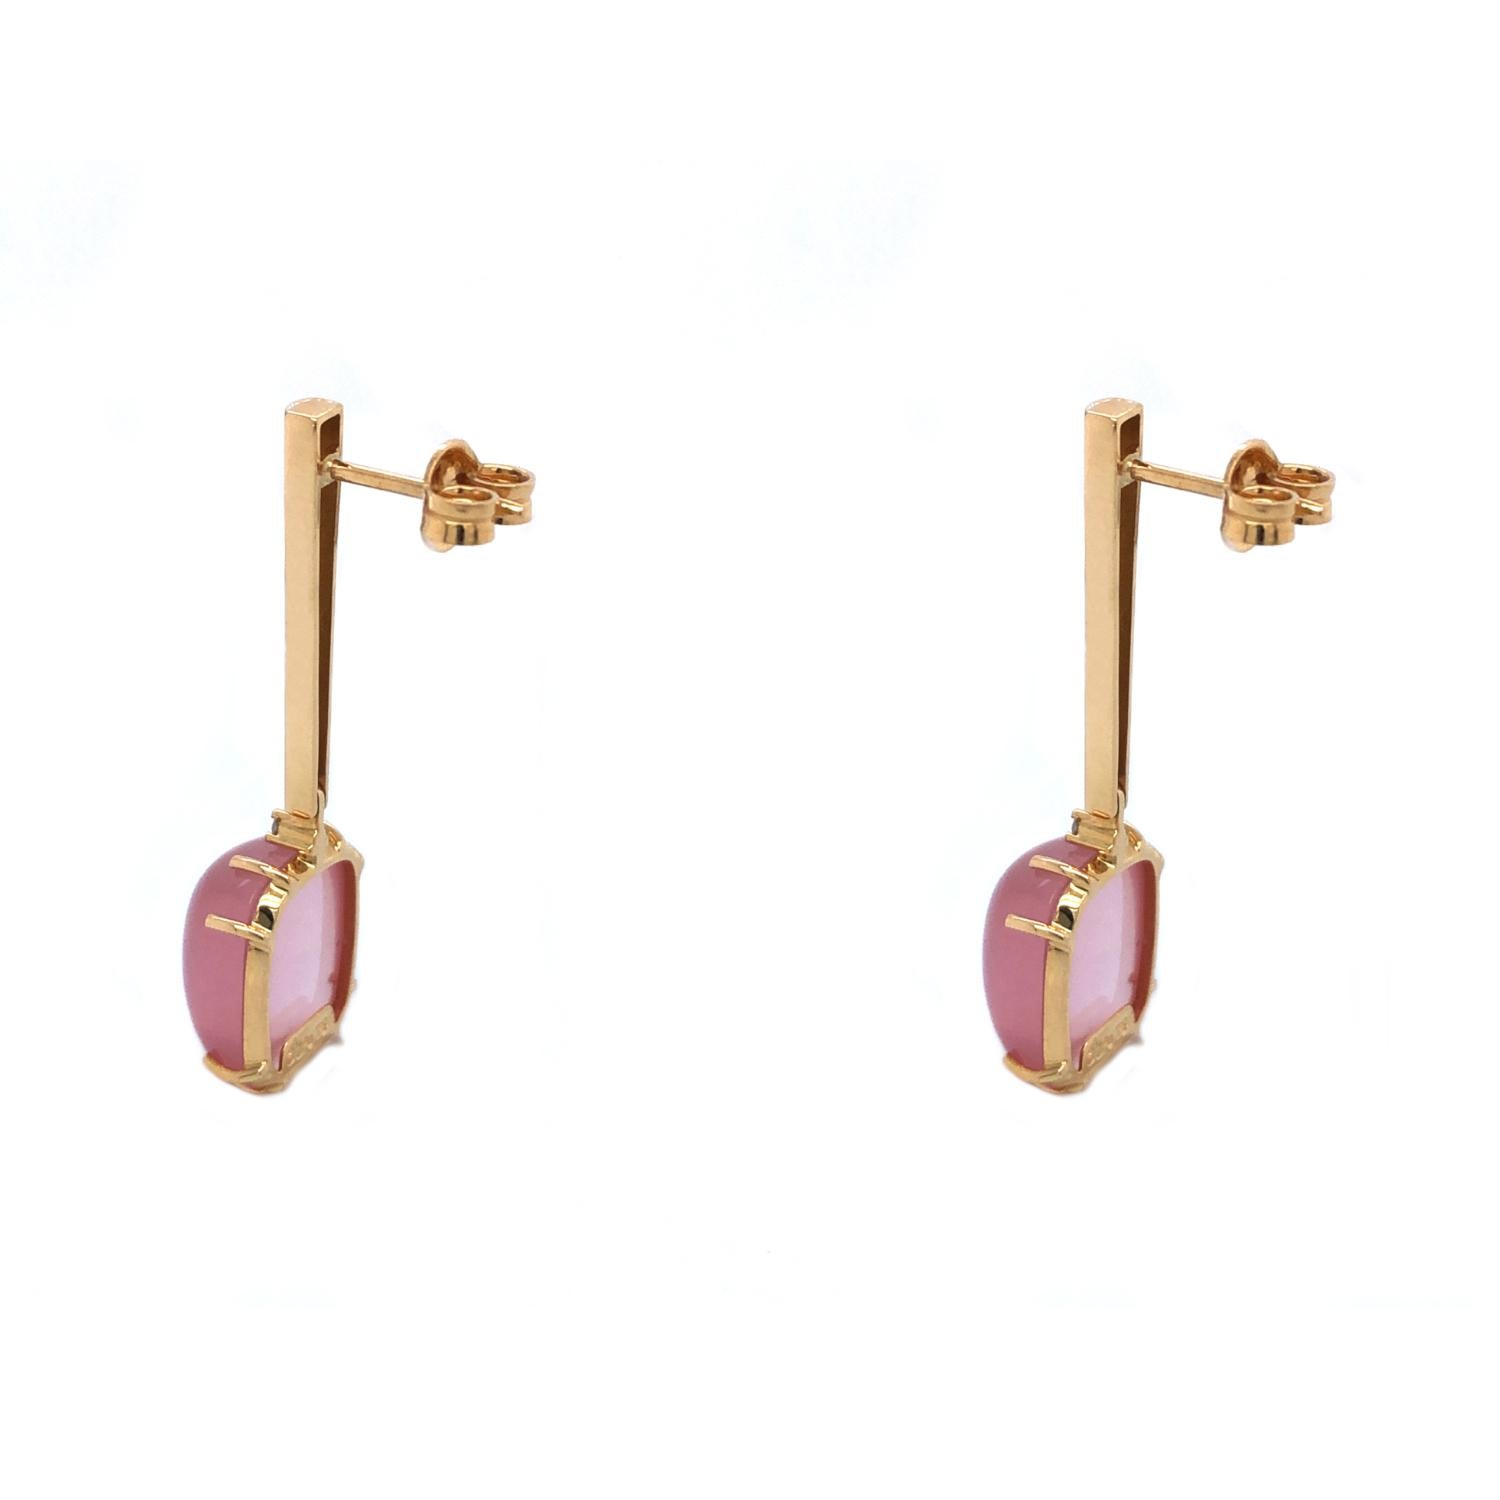 Our favorite Pendulum earrings now with stunning rose quartz gemstones and diamonds.

Materials:

- 18k solid gold earrings

-A pair of 1.5mm G color, VS-2 clarity diamonds  

- 2 natural Brazilian rose quartz rectangle shape, cabochon style